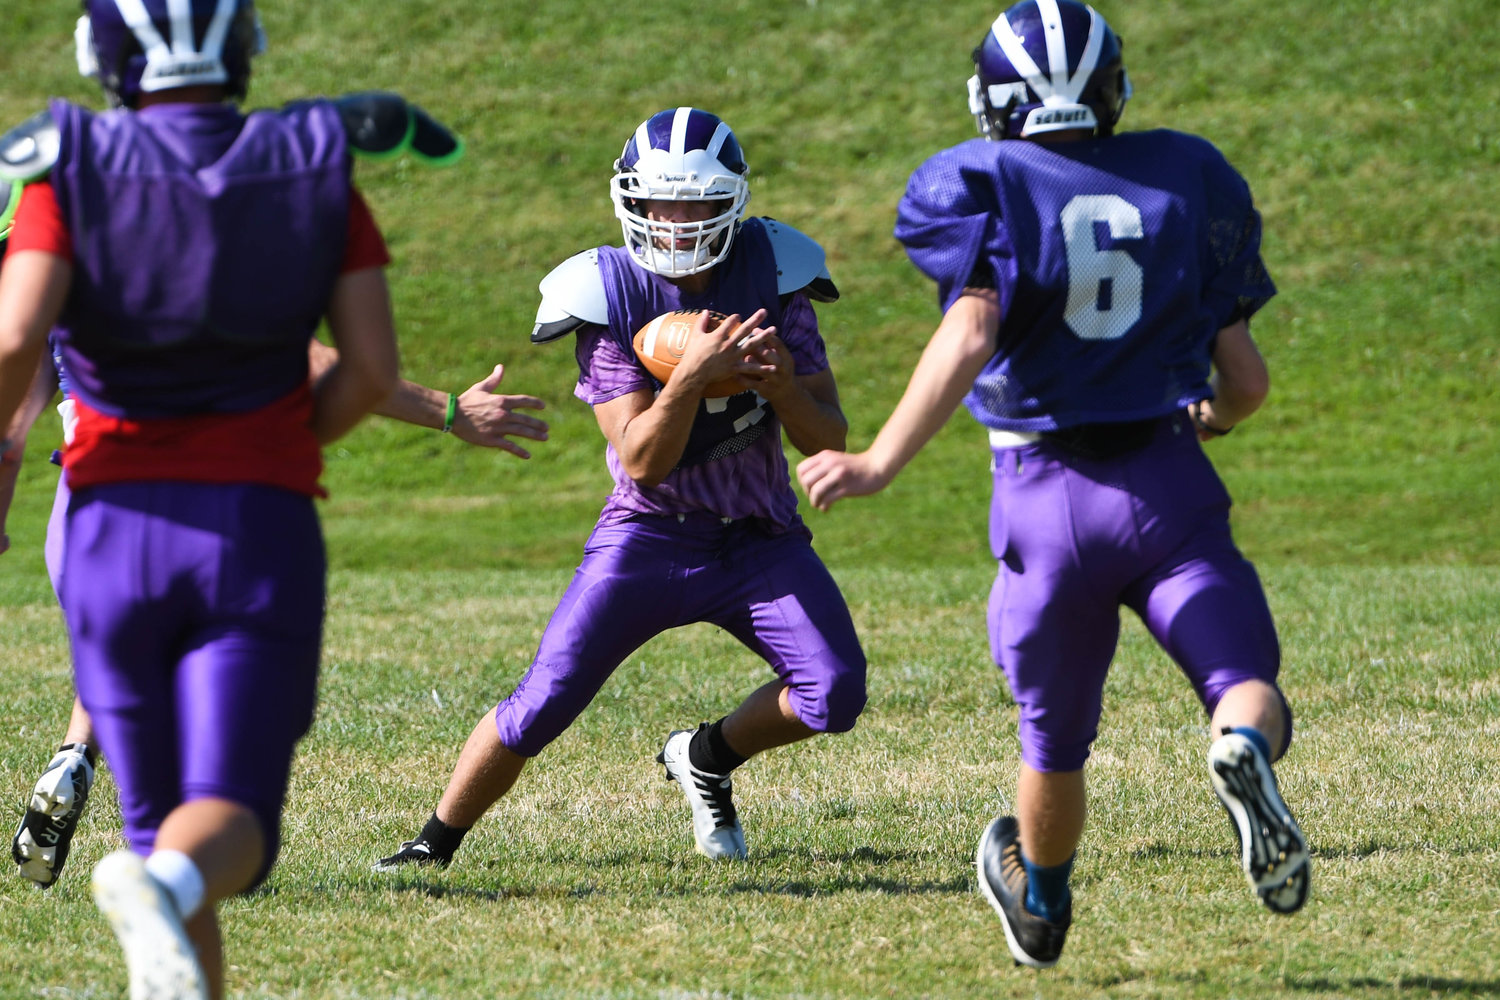 Little Falls junior Mason Rowley returns a punt during practice on Aug. 31.